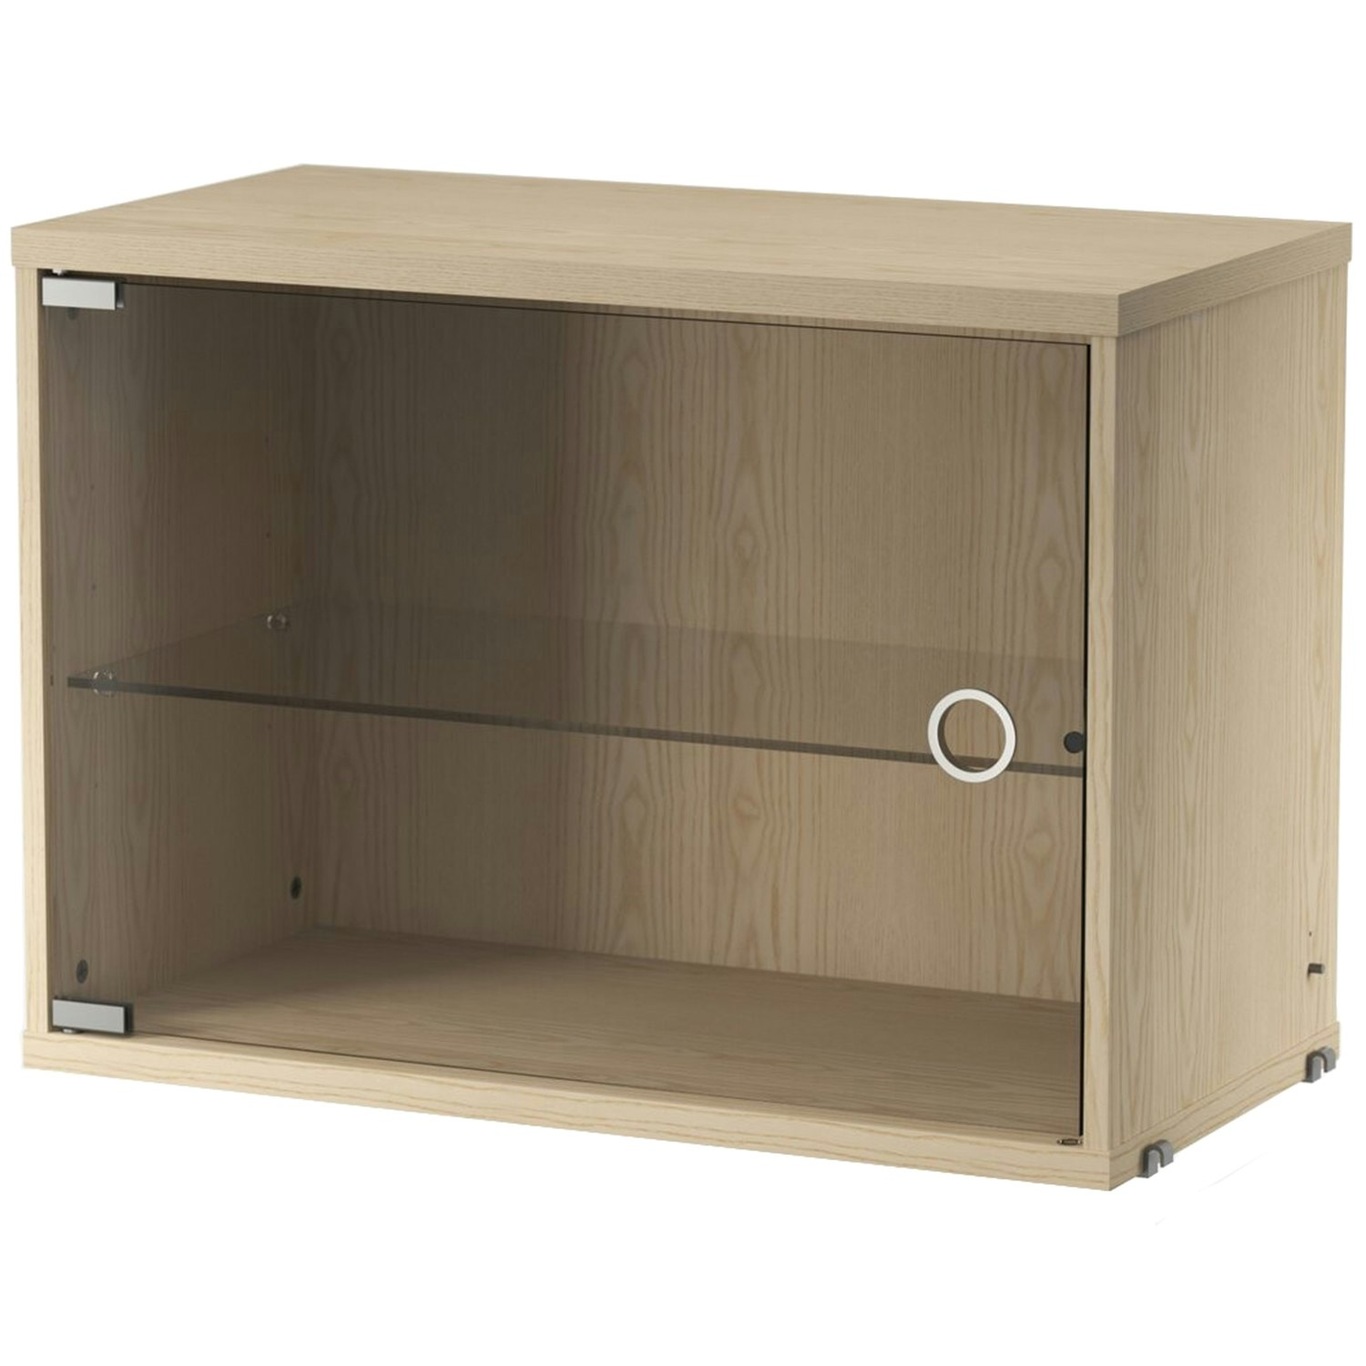 String Cabinet With Glass Door 30x58 cm, Ash